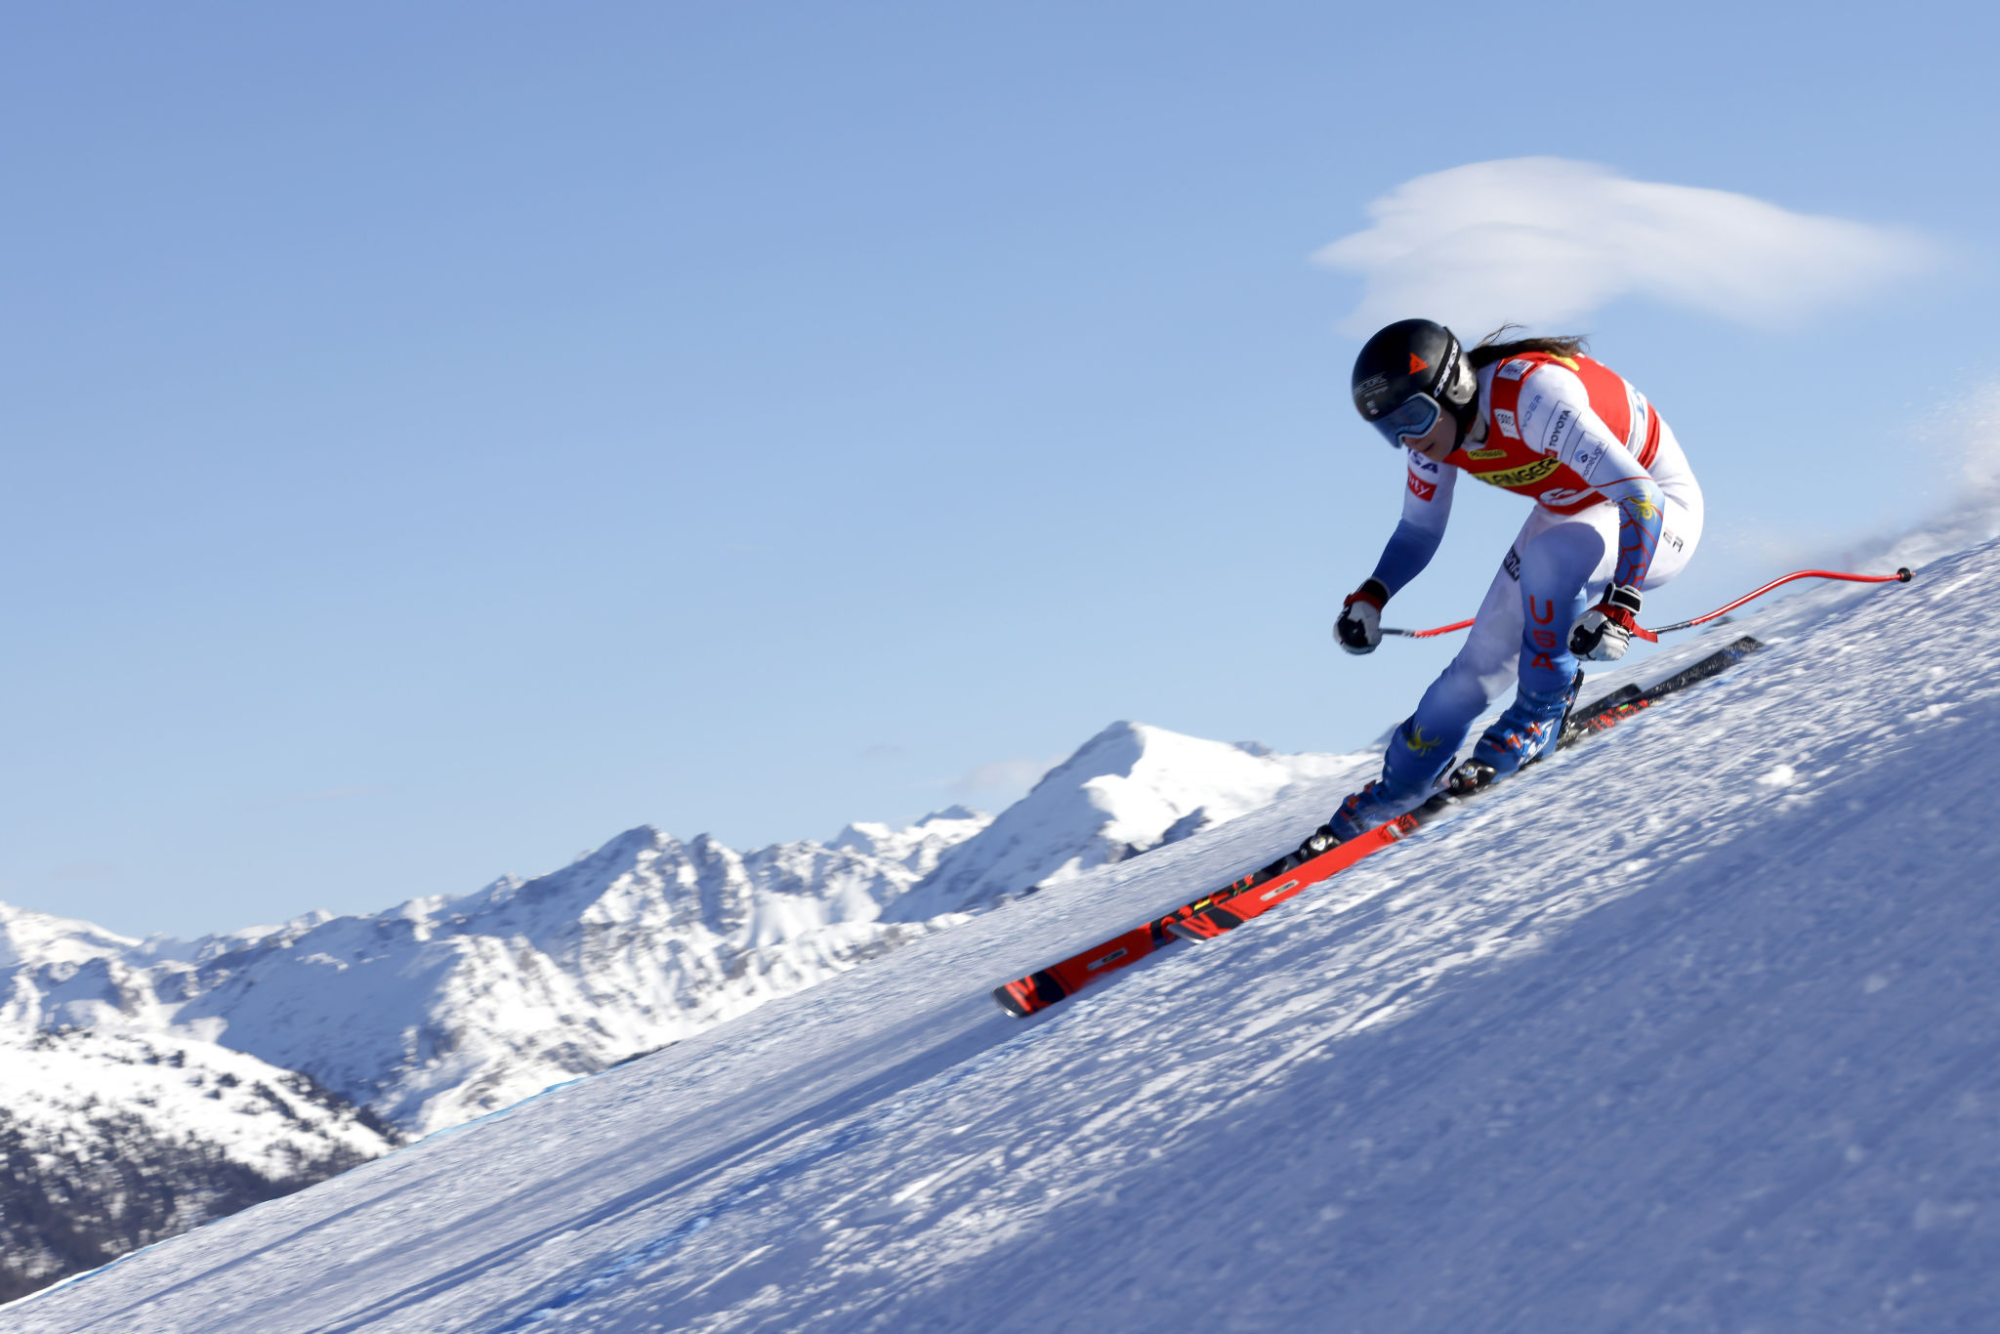 Jackie Wiles competes in an FIS Alpine World Cup downhill training run in Zauchensee, Austria, on Jan. 14.